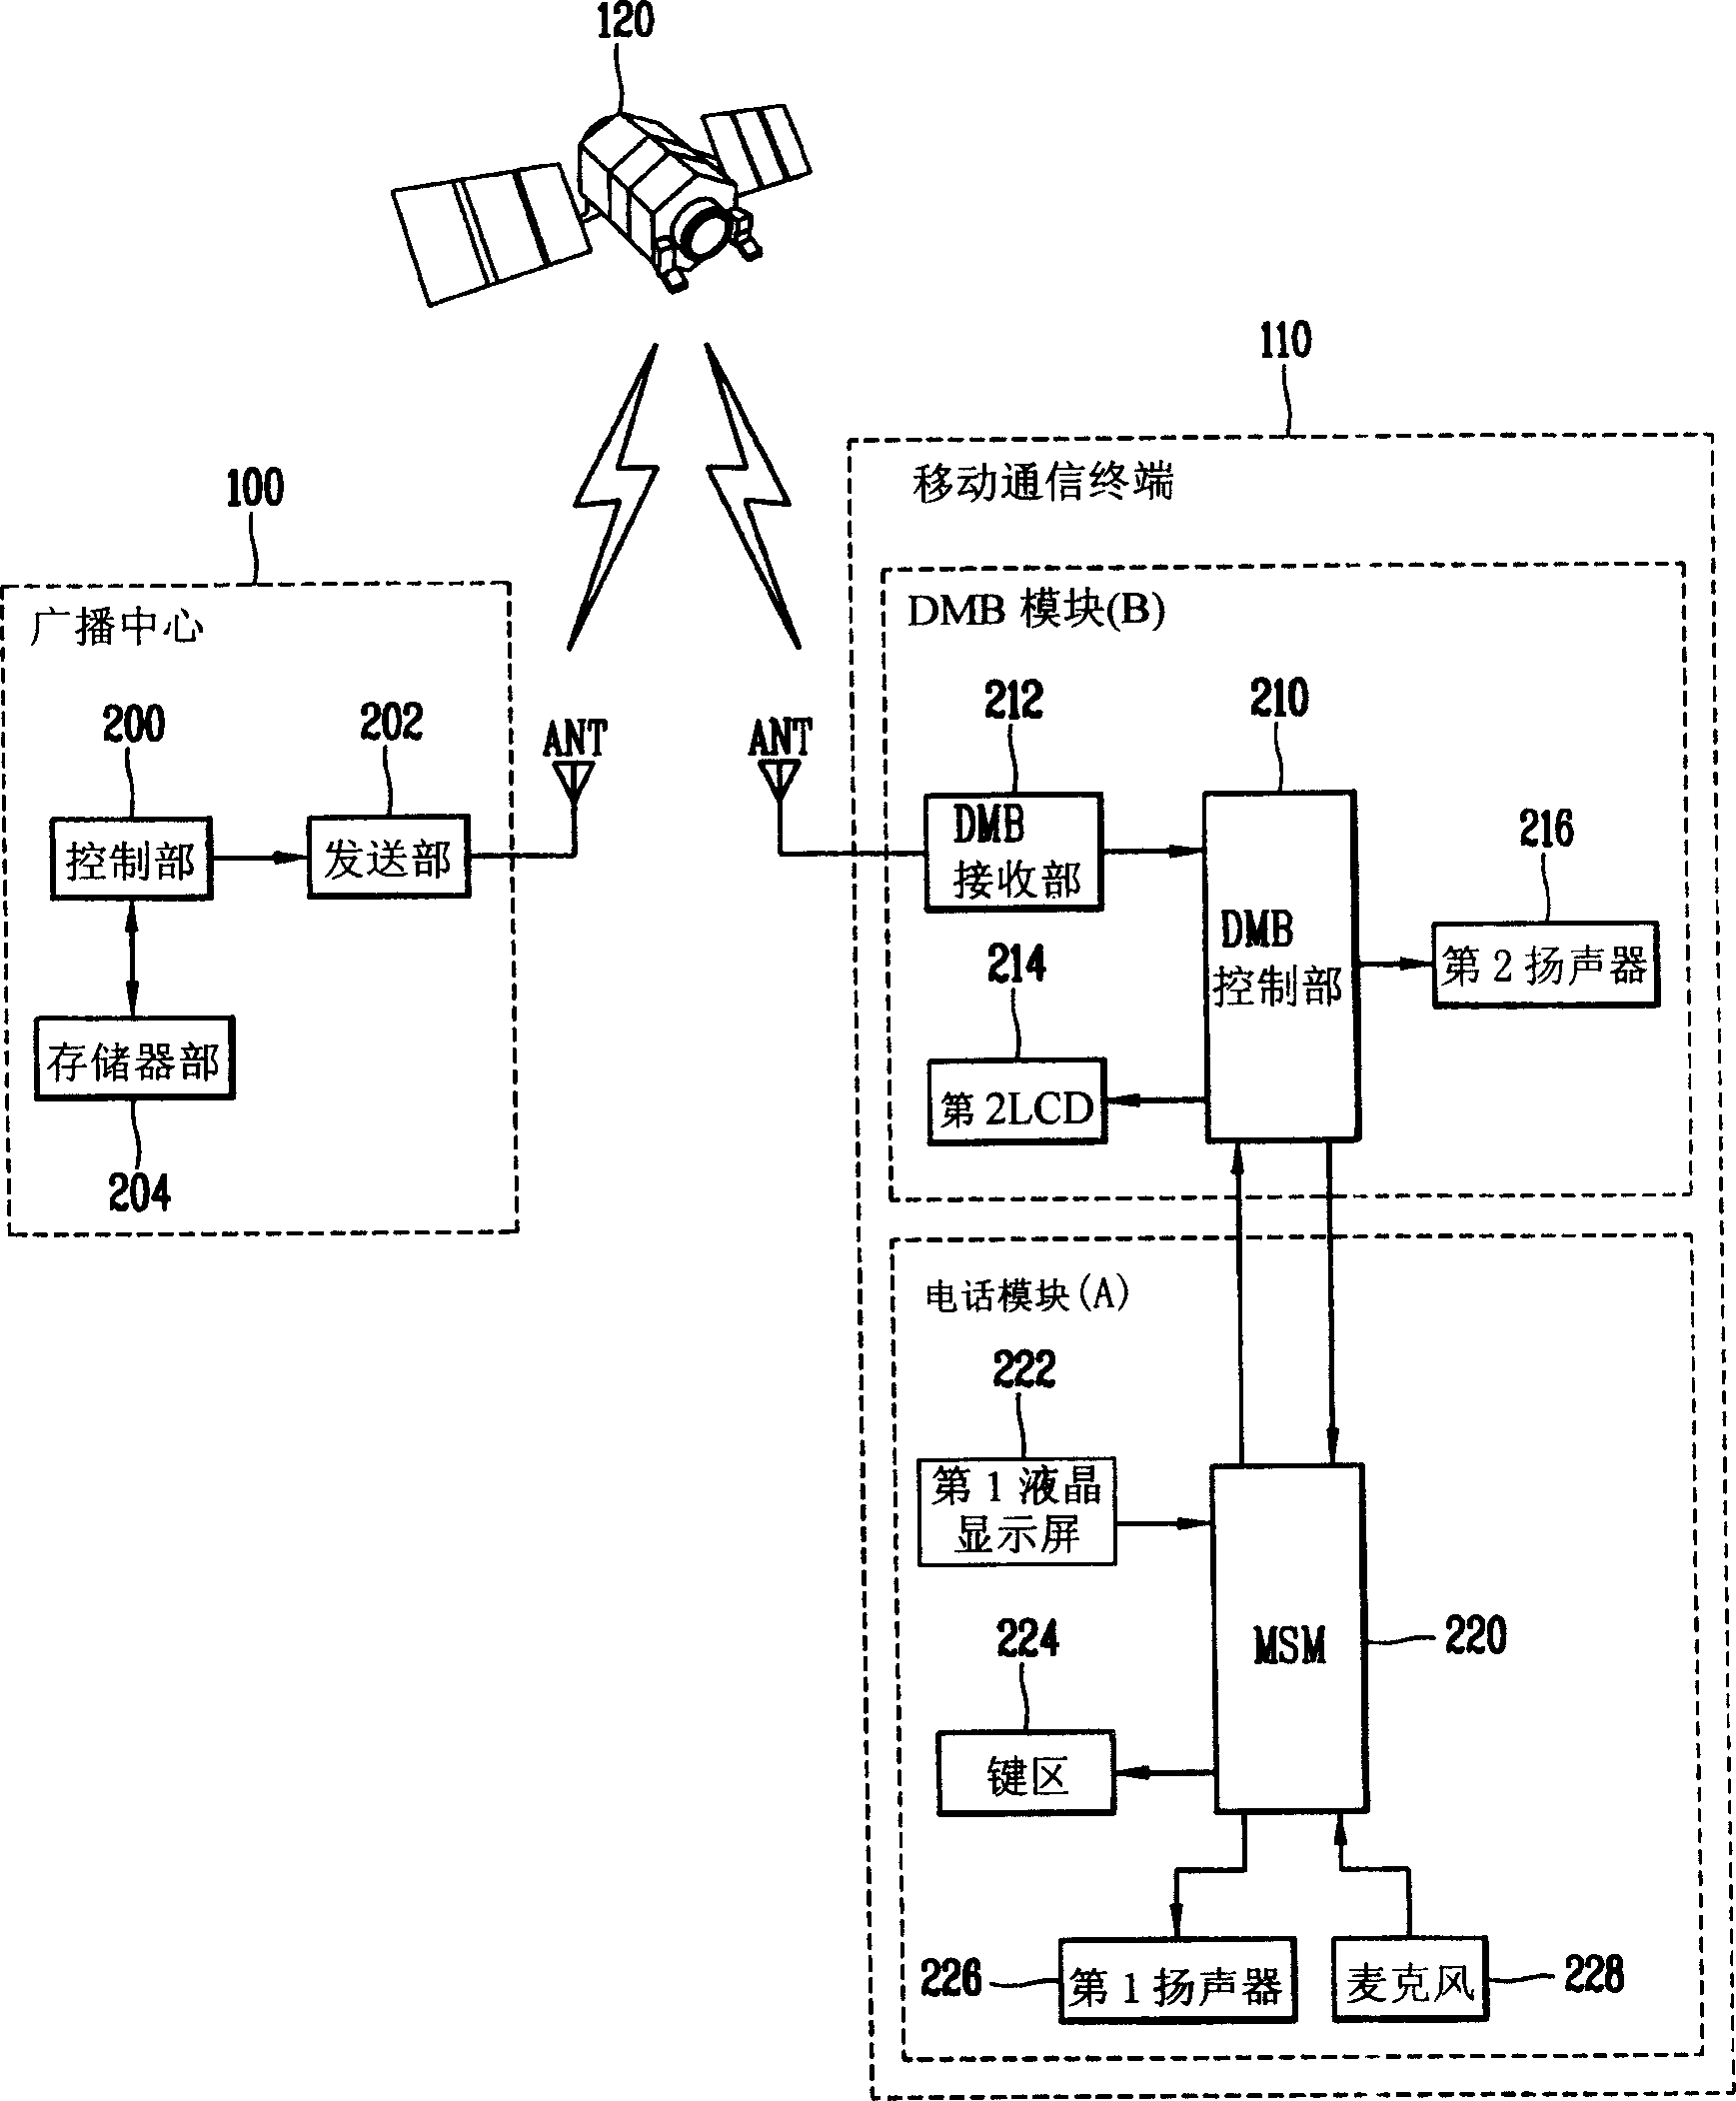 Dmb system for notifying important dmb data transmission and its method